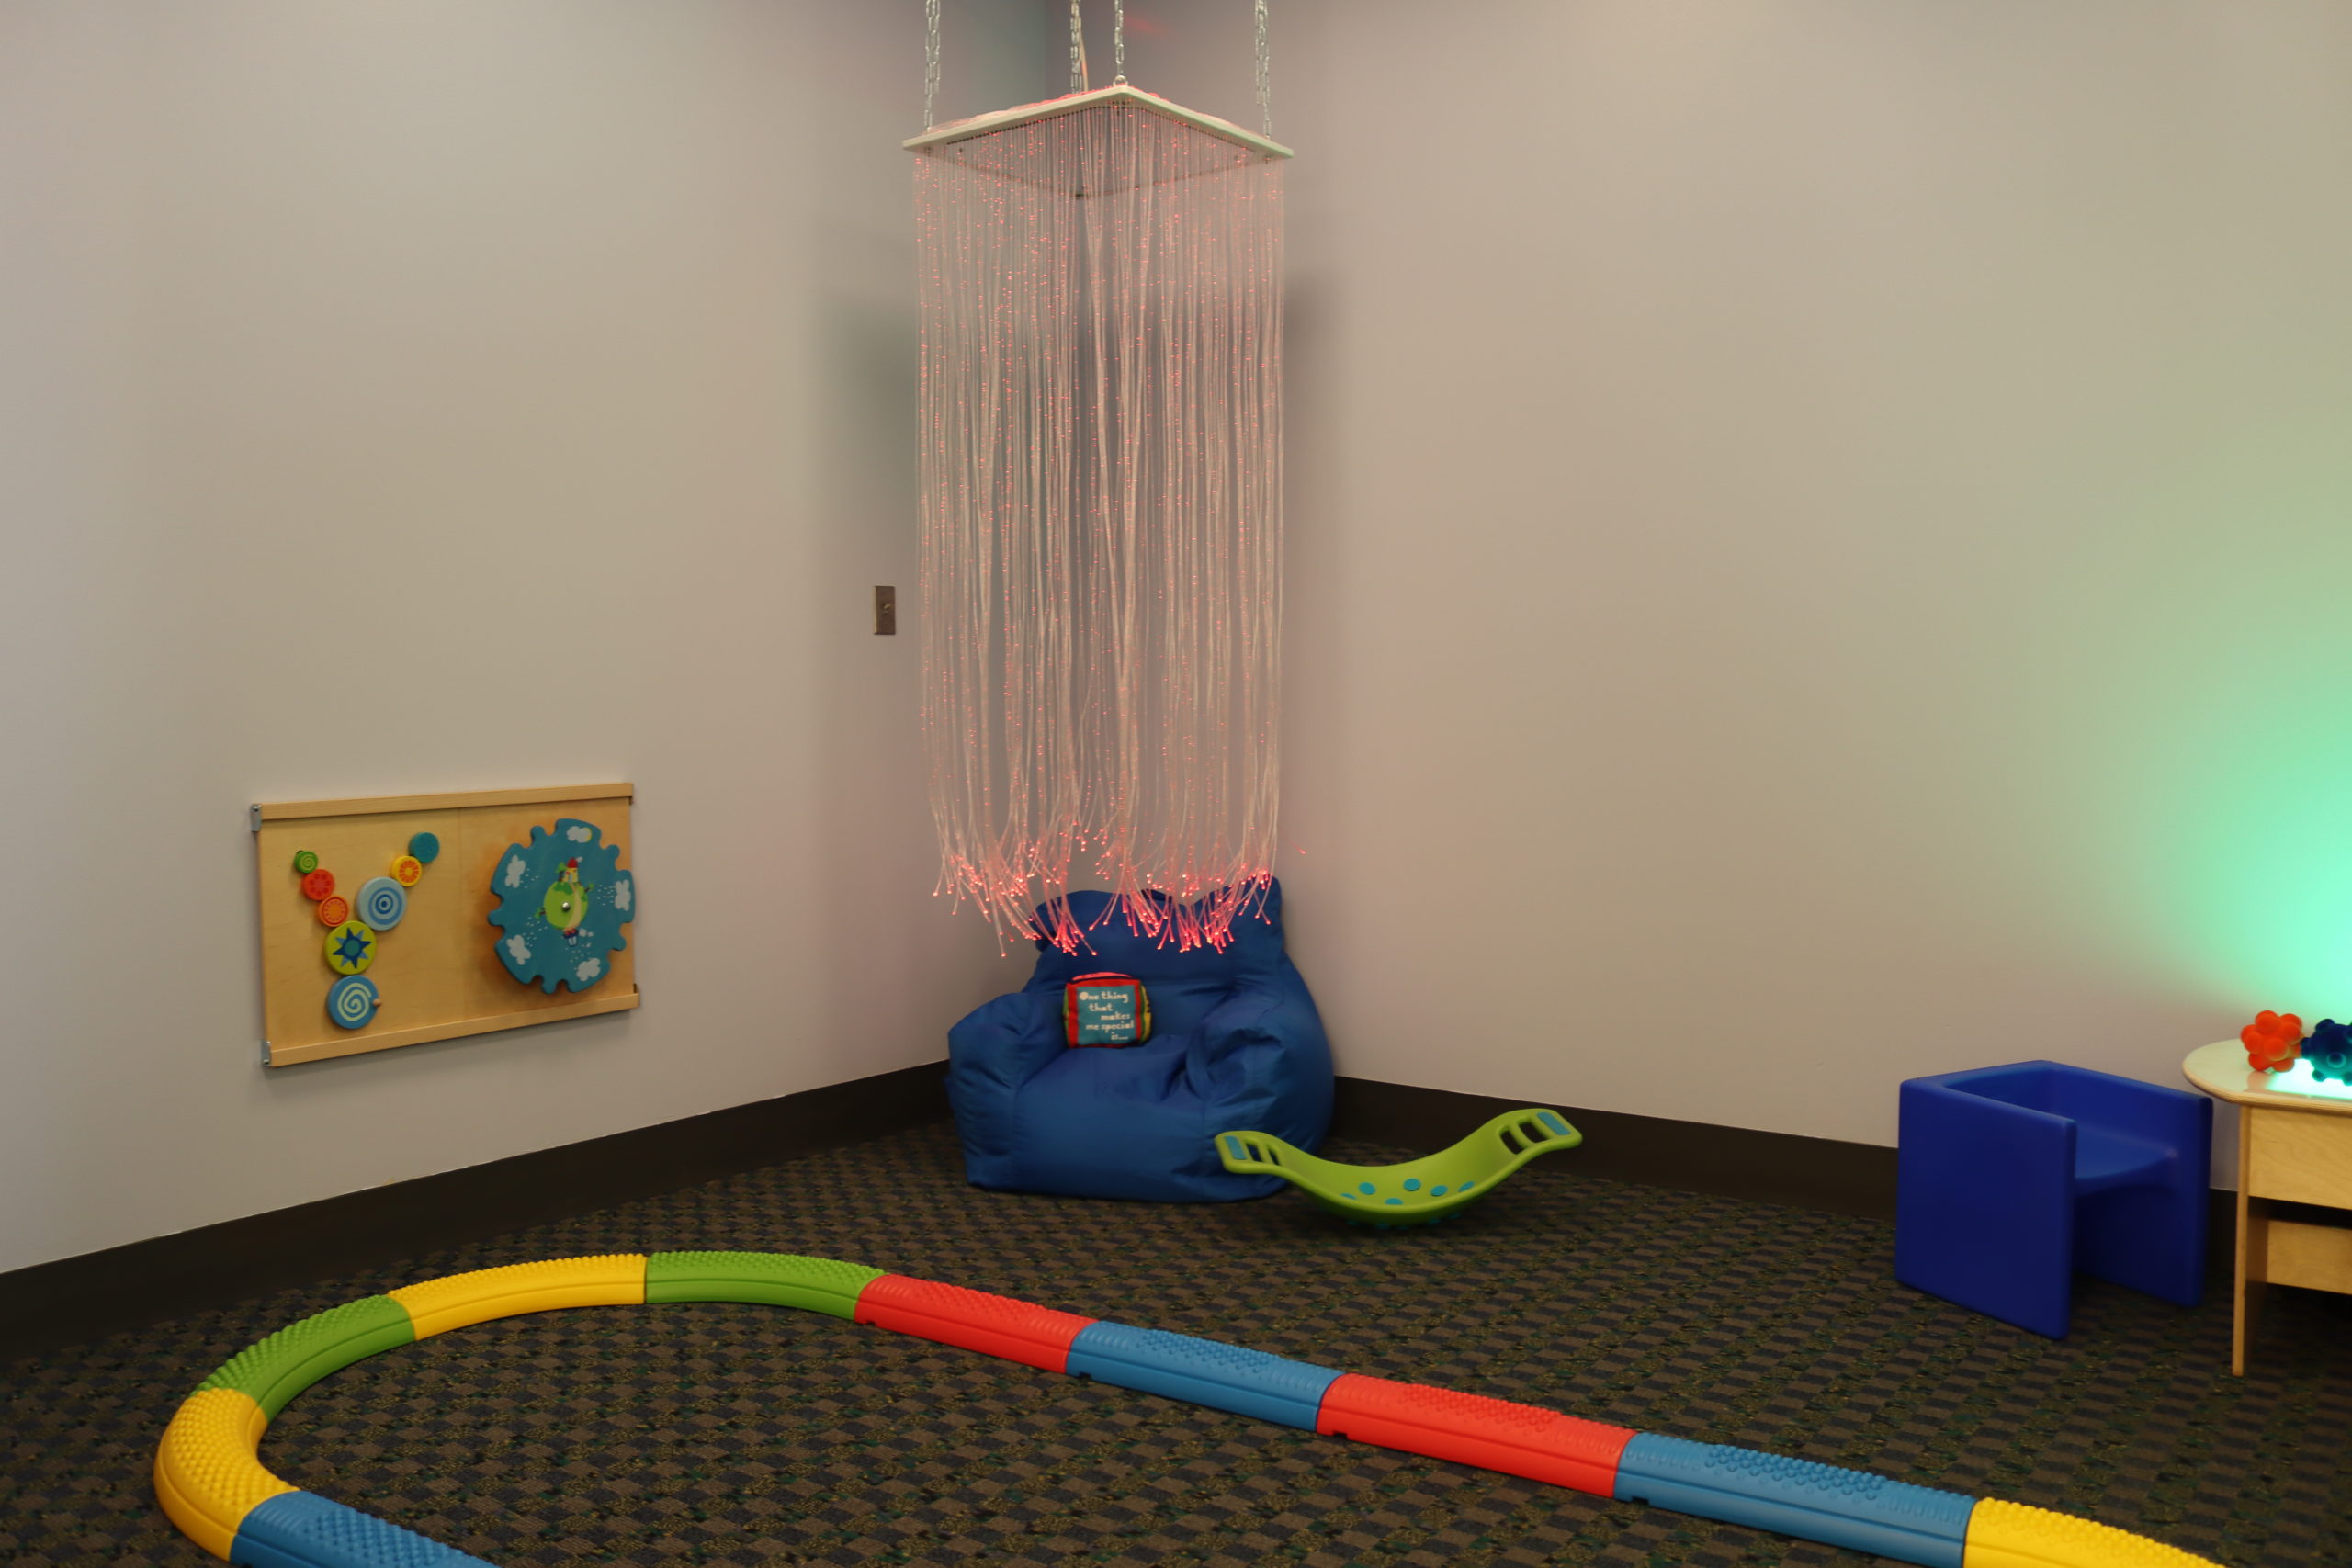 EVPL Read Sensory Room - Dimmable lights, wall mount activity panels, tactile balance beam, and more